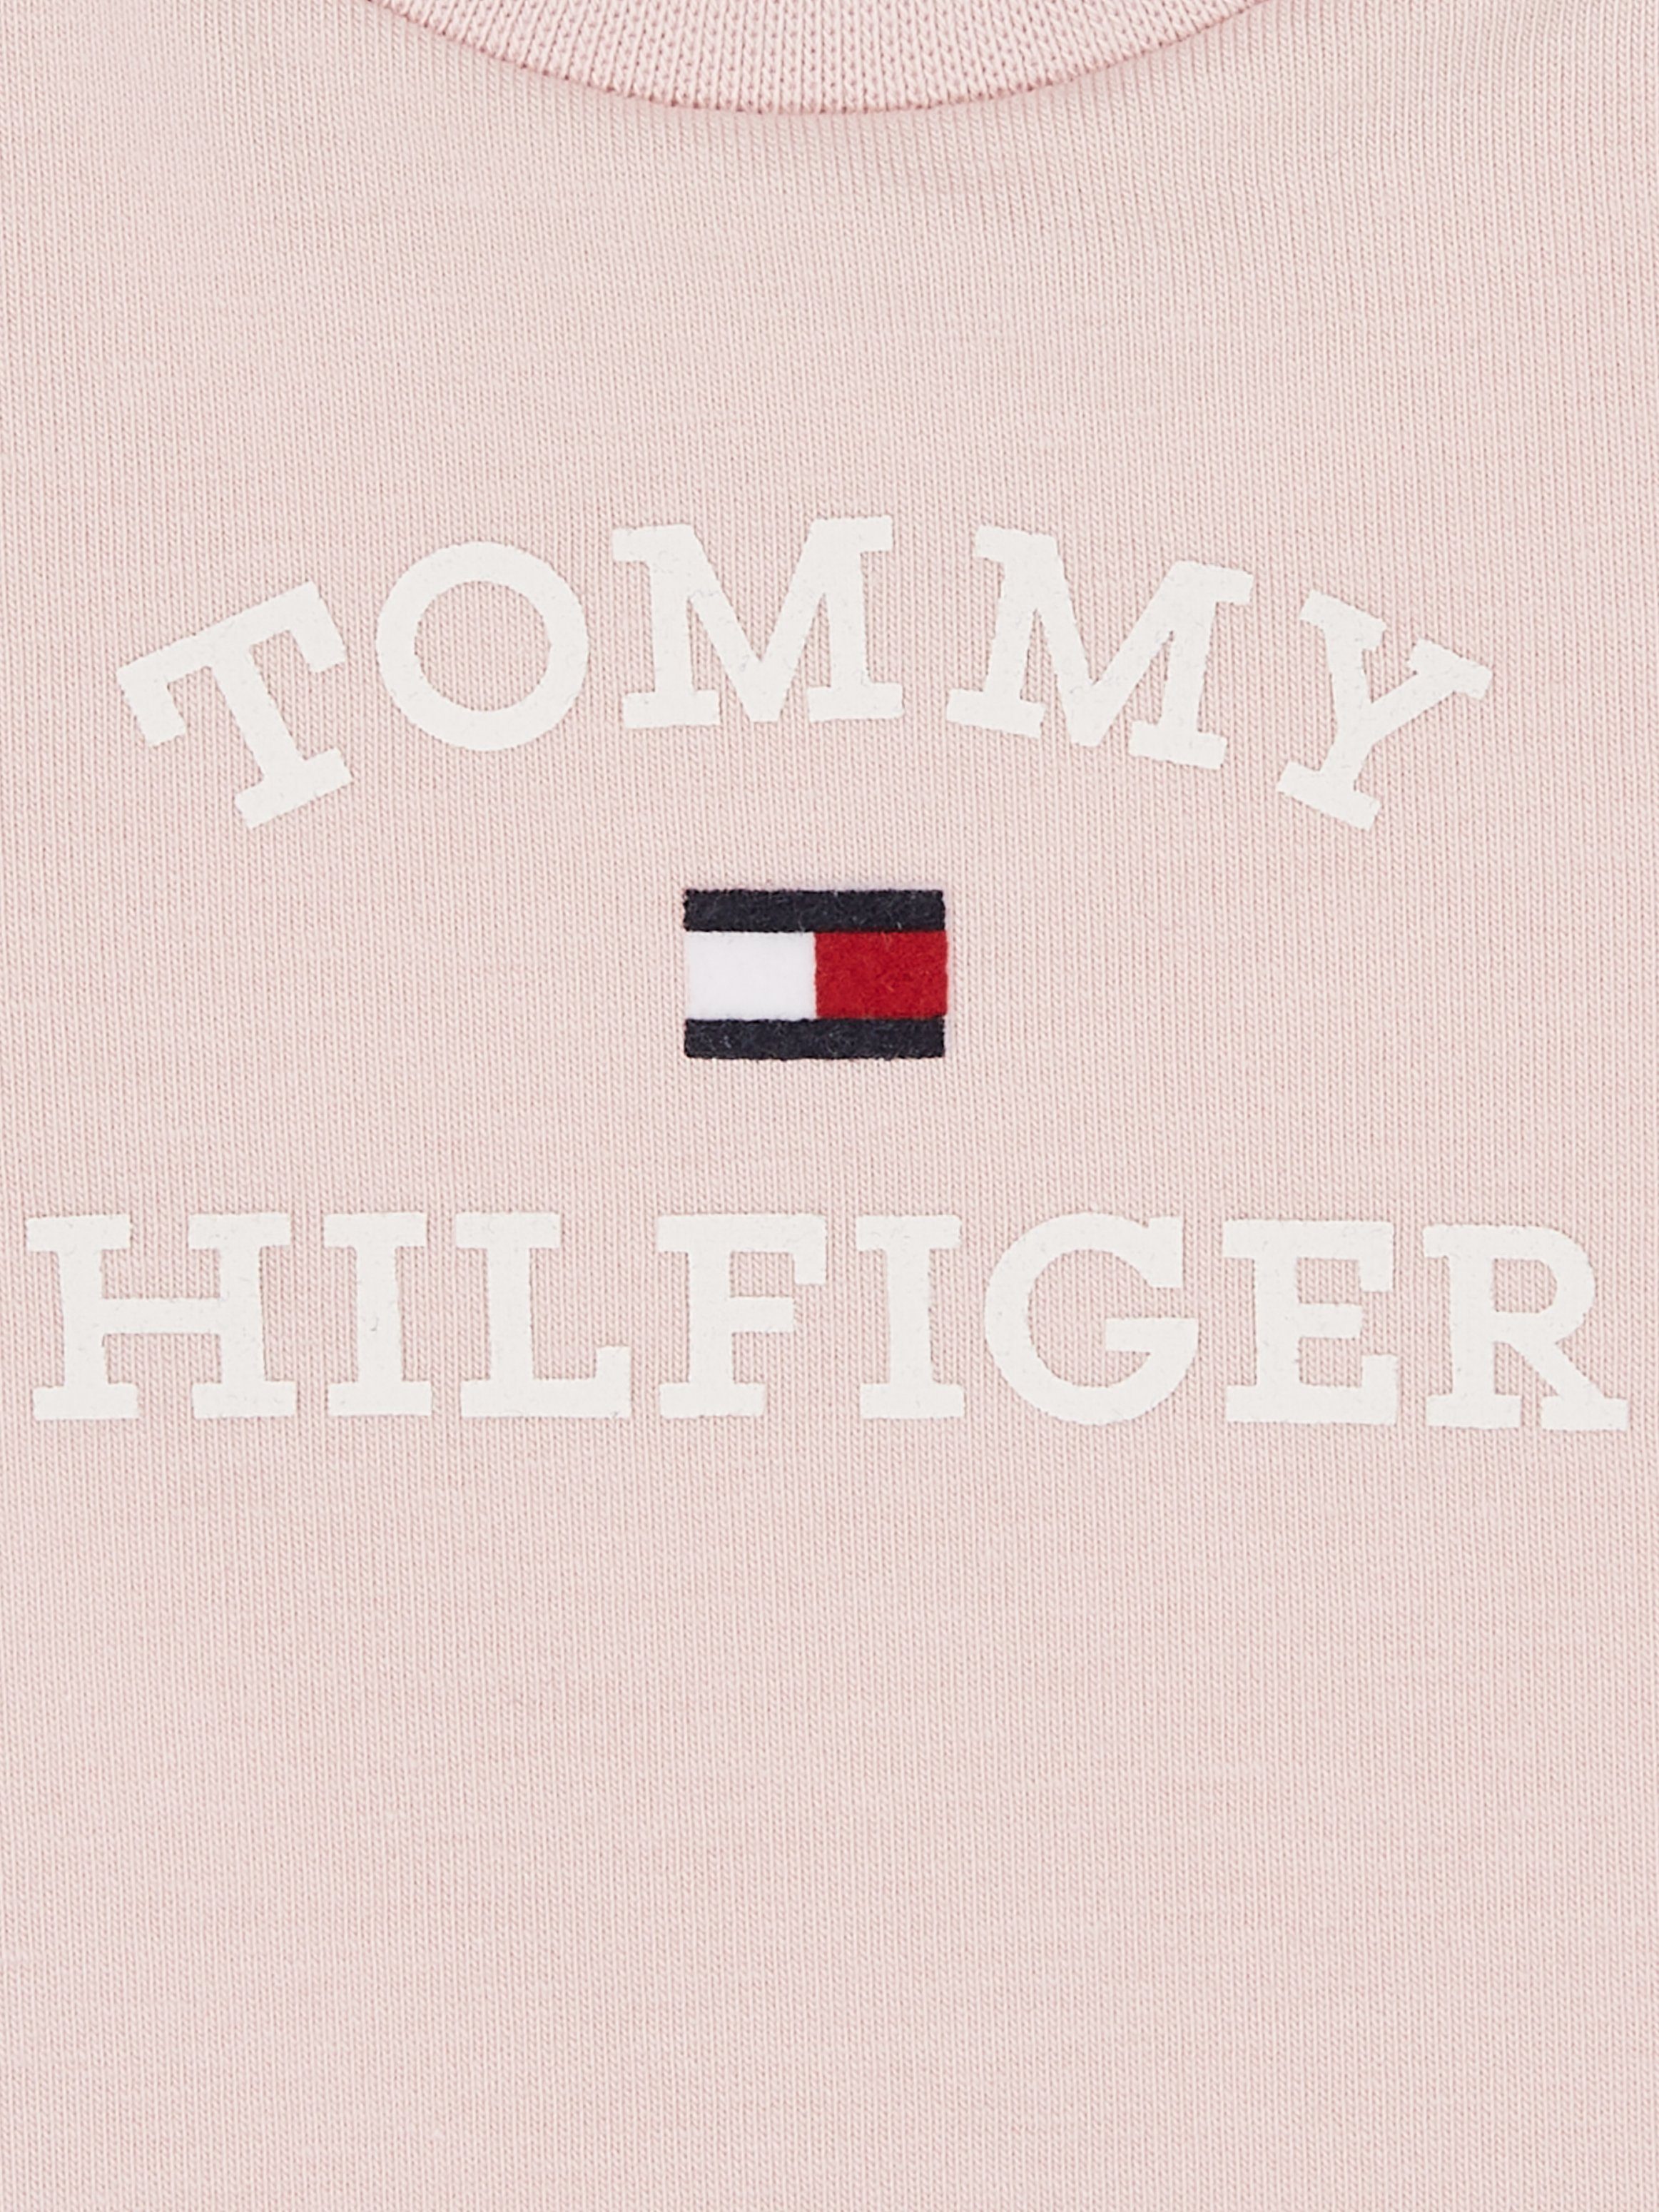 Tommy Hilfiger T-shirt BABY TH LOGO TEE S S